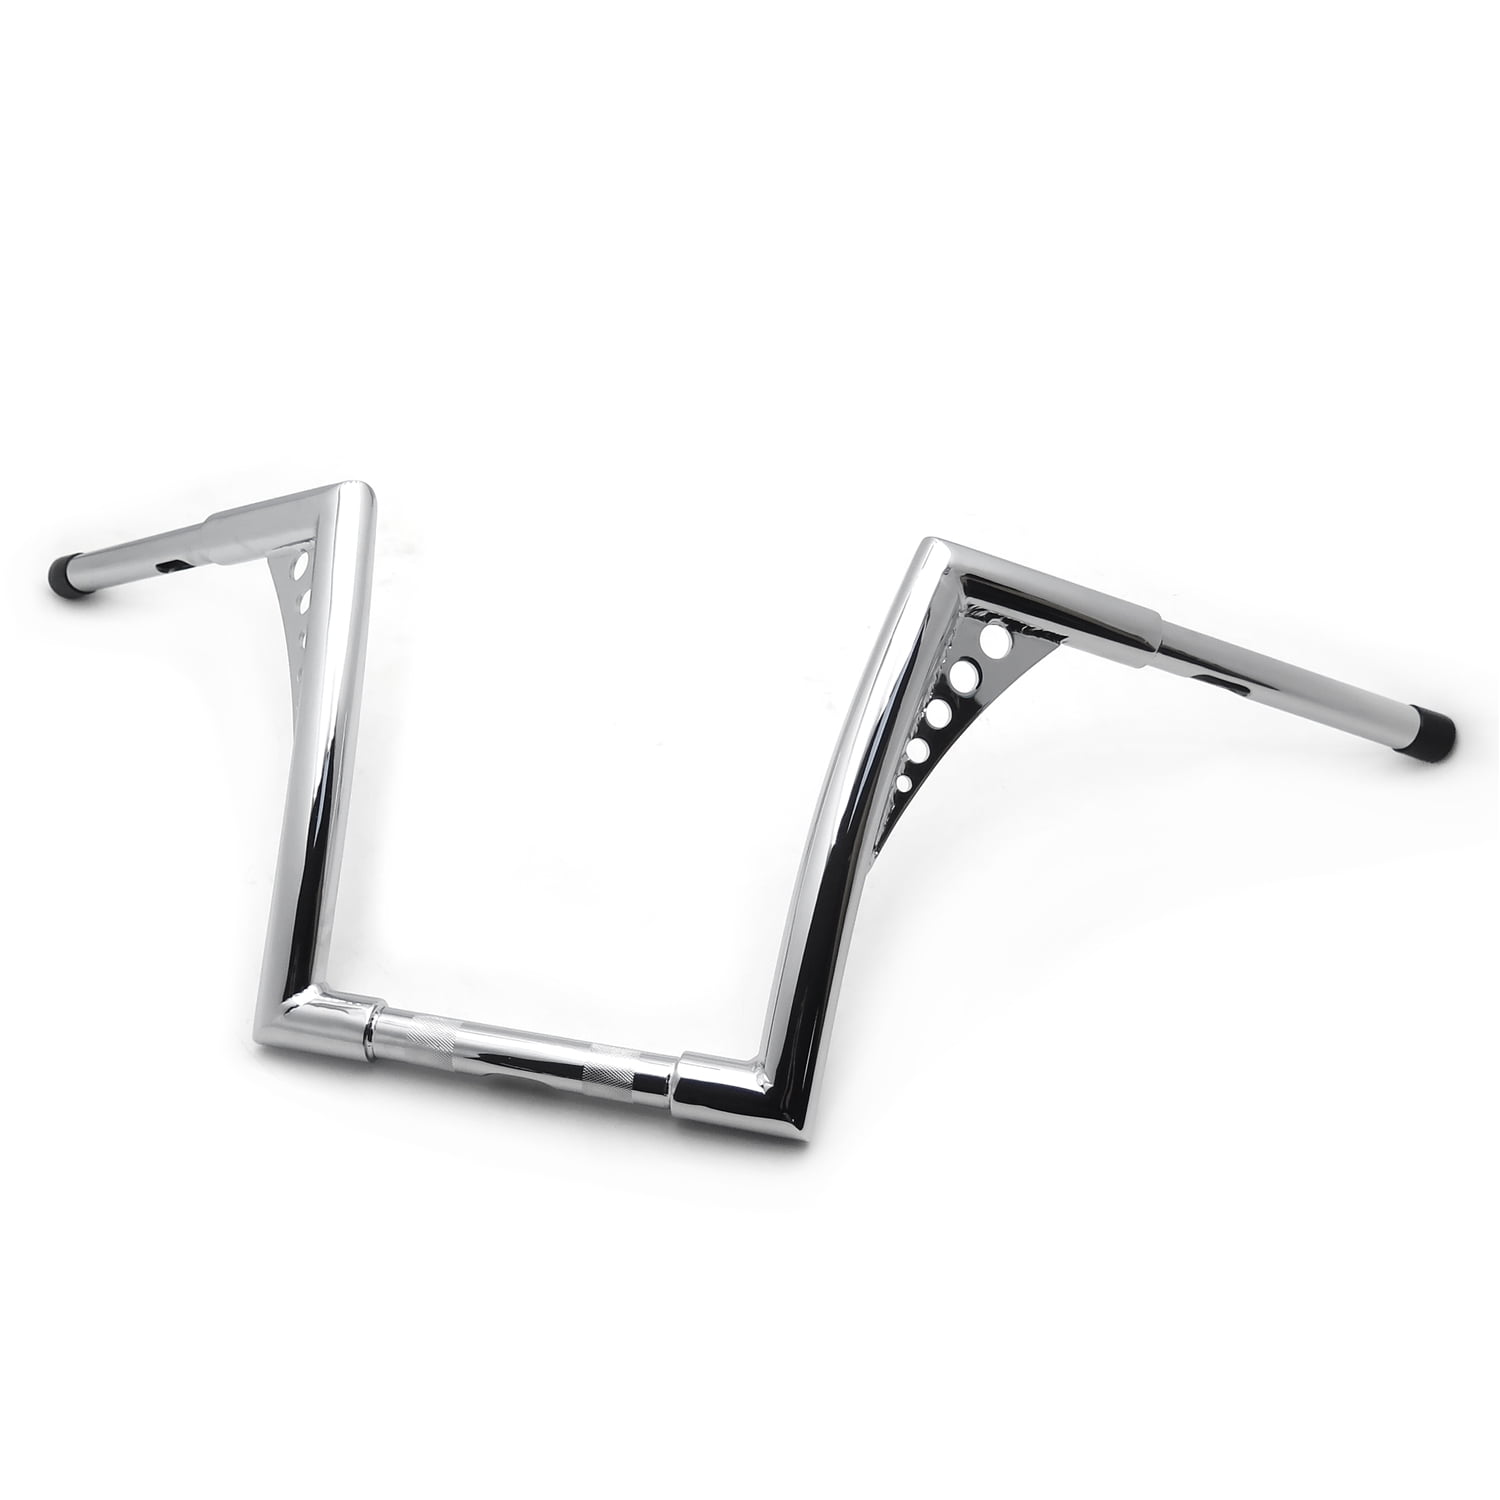 XMT-MOTO APE HANGERS BARS FAT 1-1/4 14 RISE HANDLEBARS fits All Harley-Davidson FLST and any Custom Application Sportster XL FXST including Throttle-by-wire models 